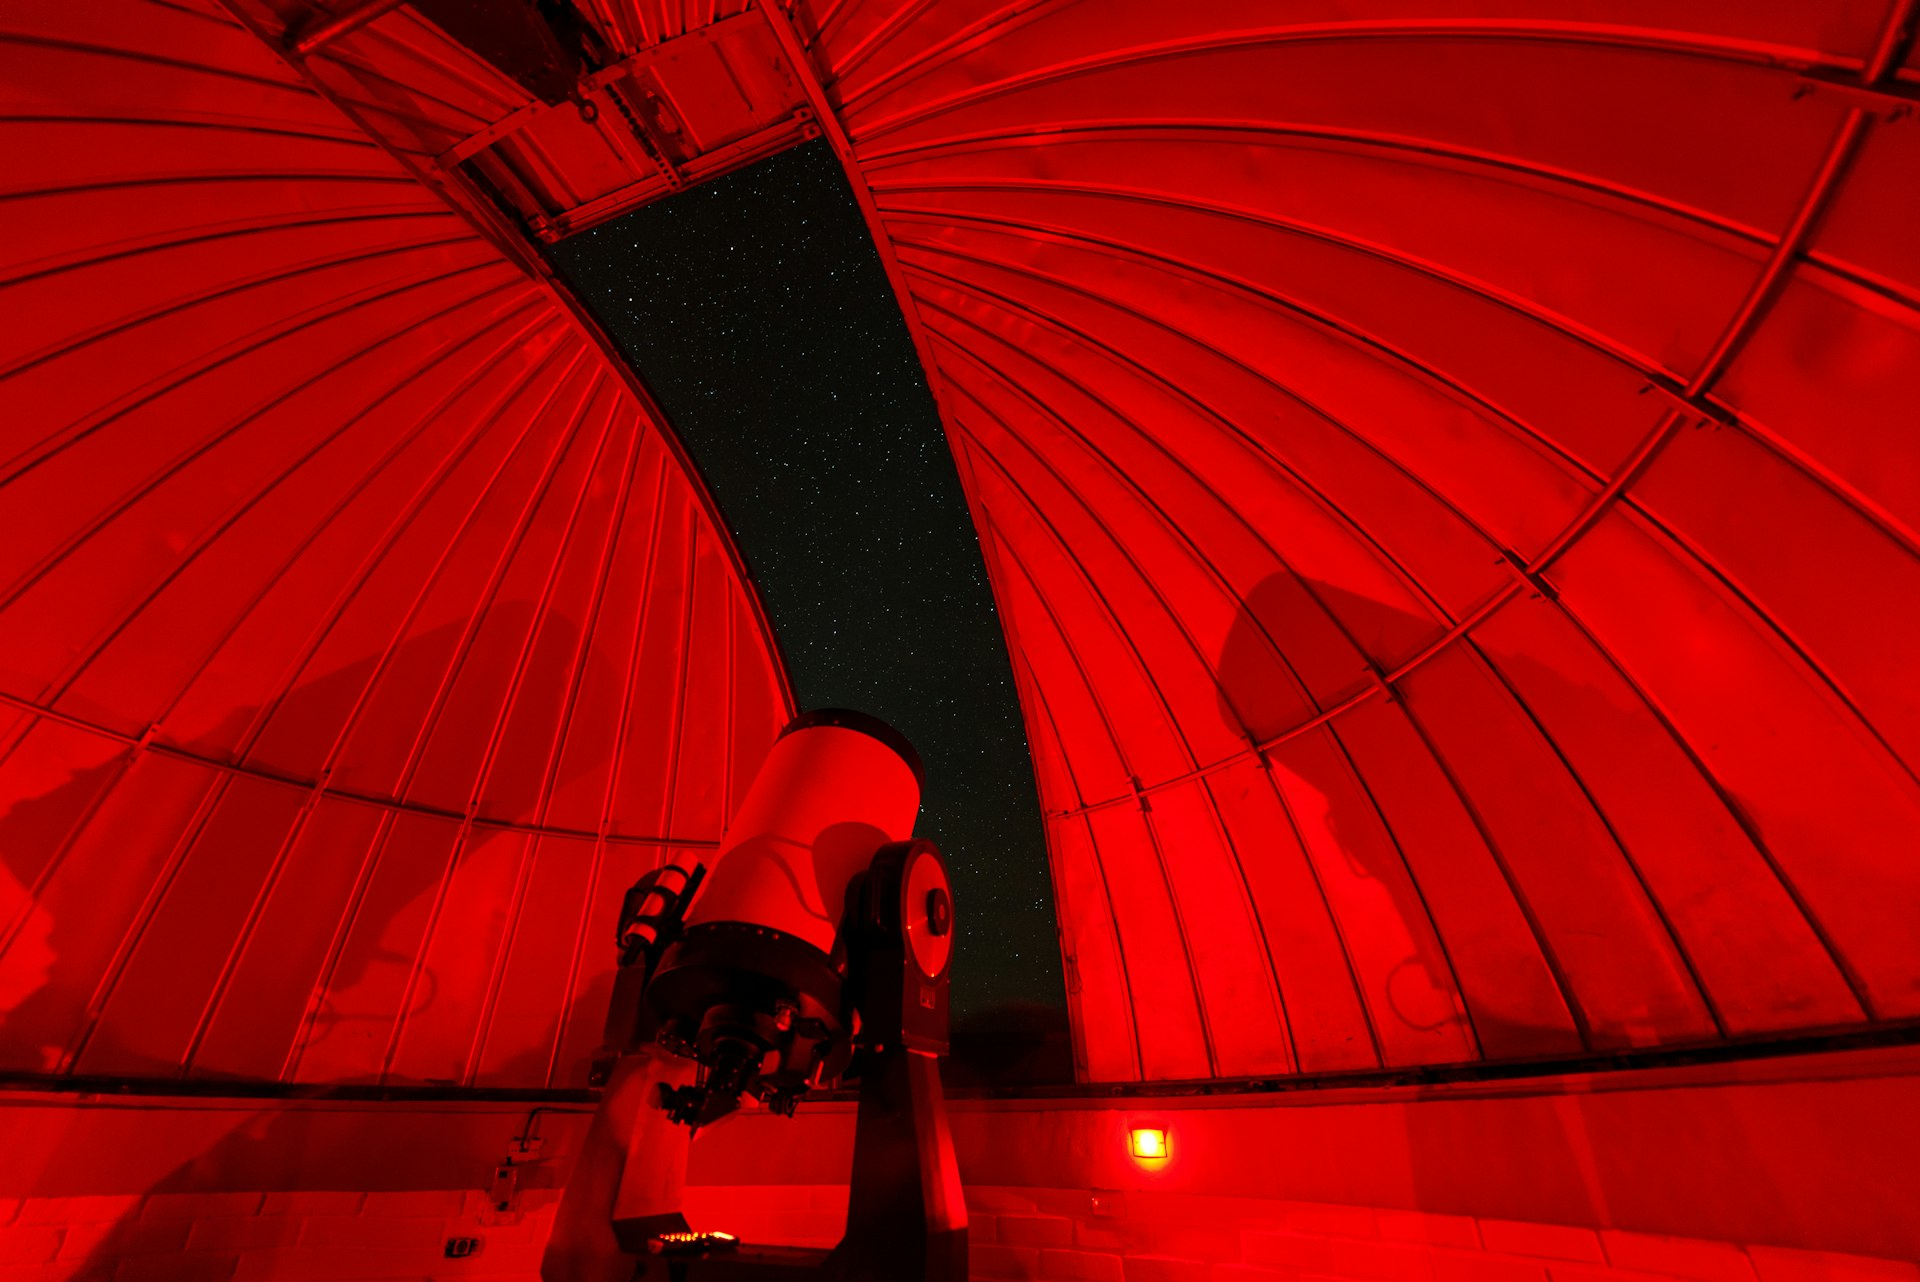 An observatory at night, lit with dim red light. A large telescope stands in the center of the observatory pointing towards the sky